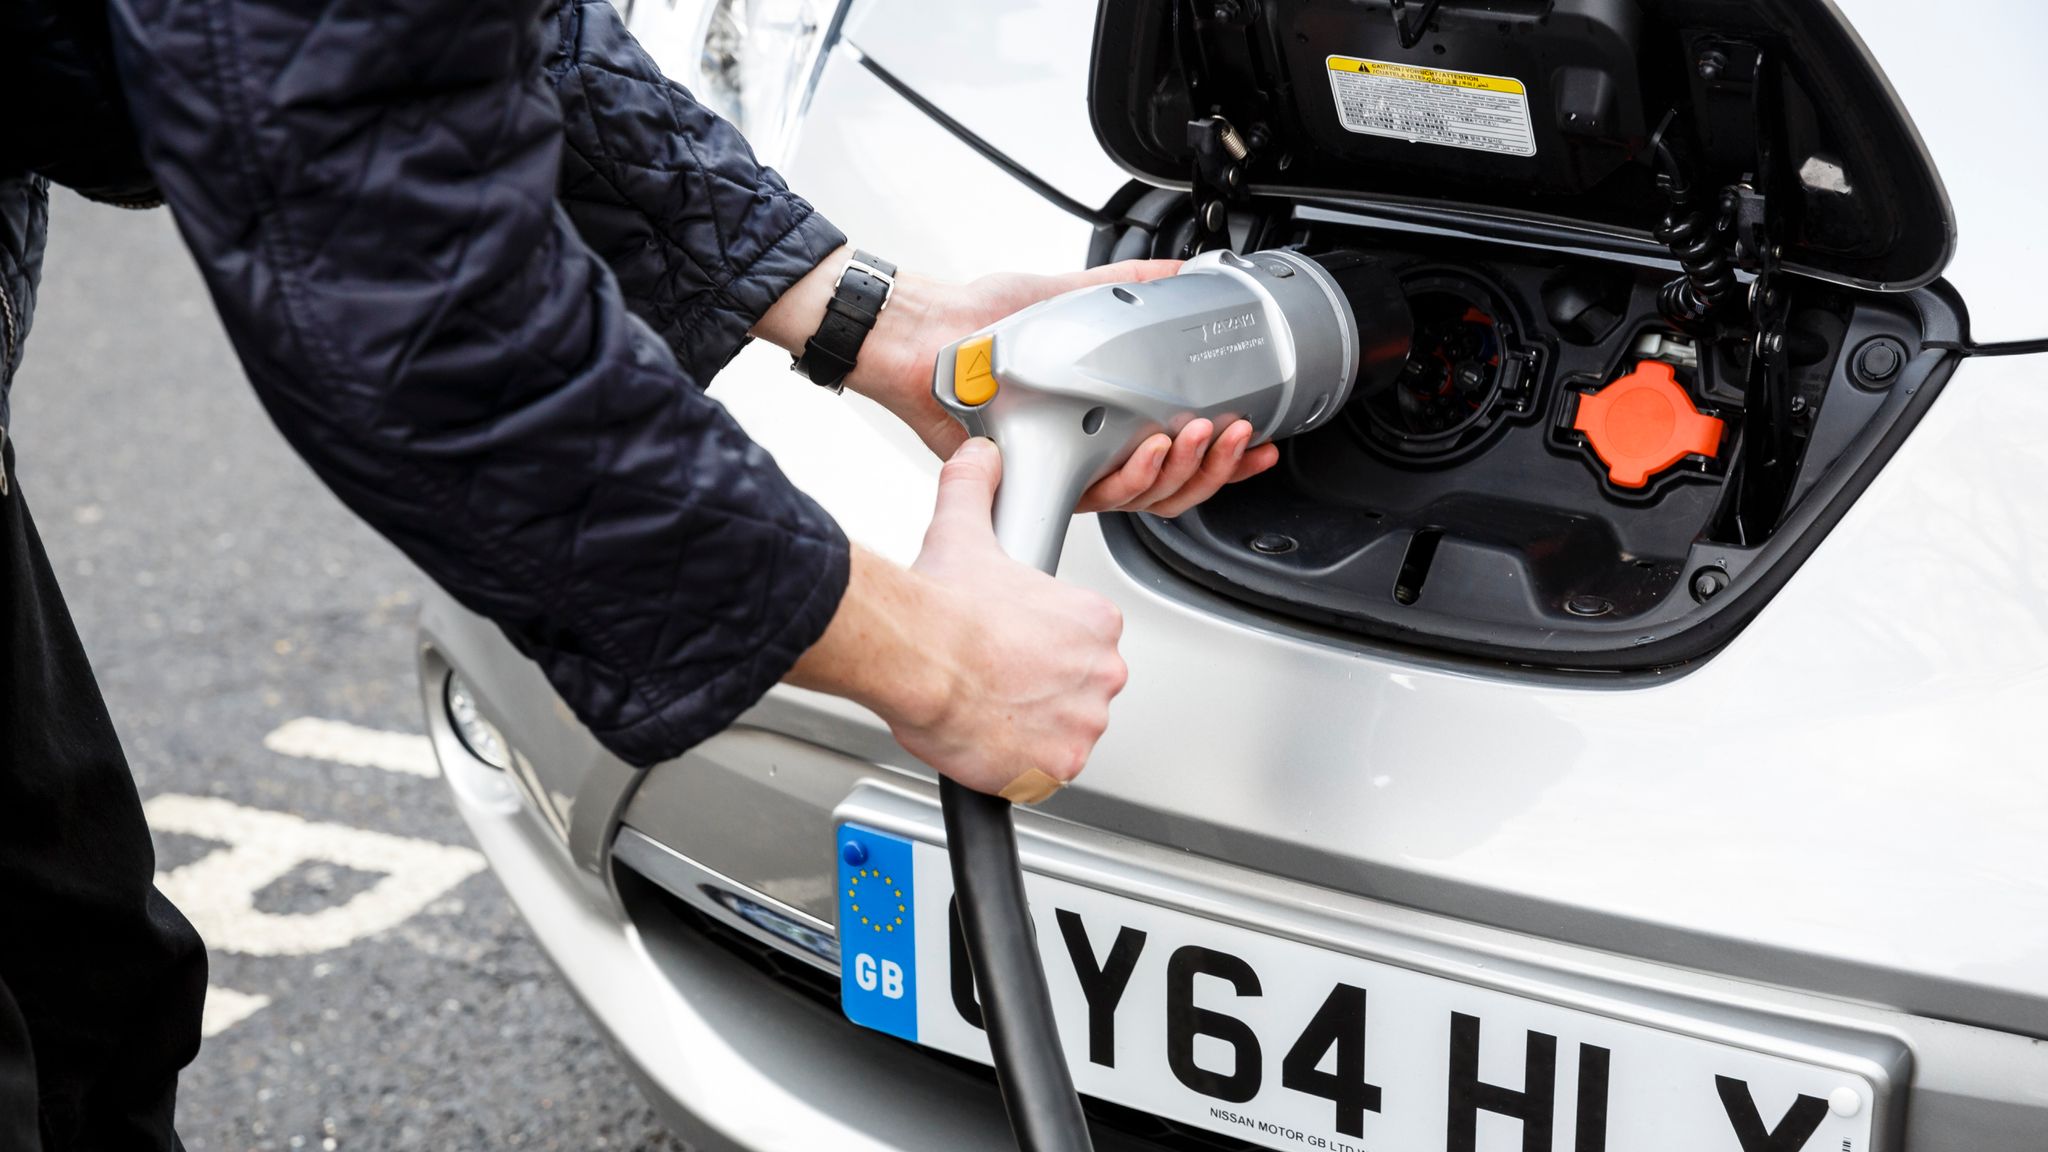 'Game changing' electric car chargers return power to grid UK News